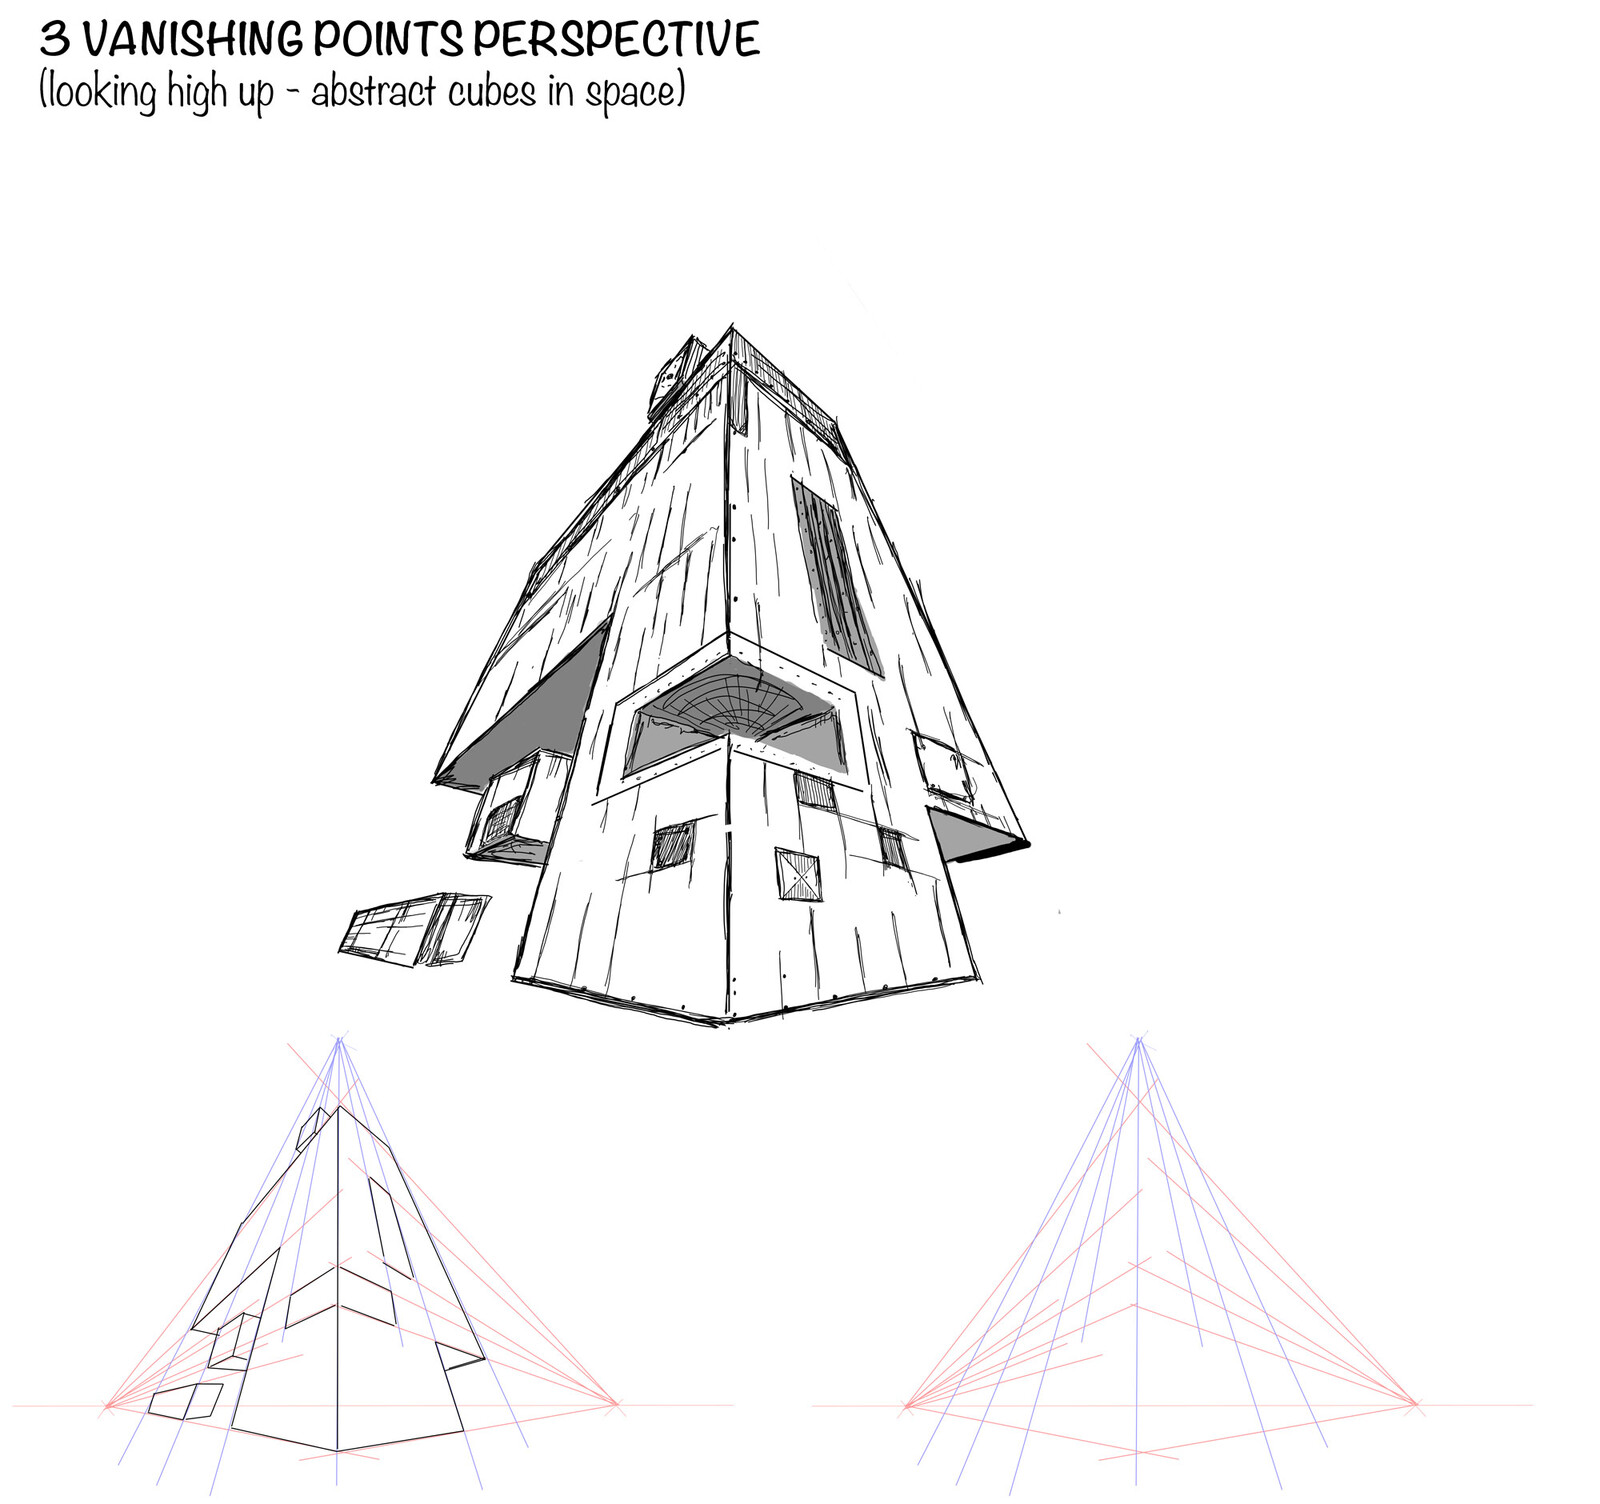 Exercise 3. Three vanishing points. Oblique perspective.

Imagine yourself looking high up or high down. There are two basic types of 3-point perspective based on the position of the horizon line. Worm’s Eye View – imagine yourself looking high up or down